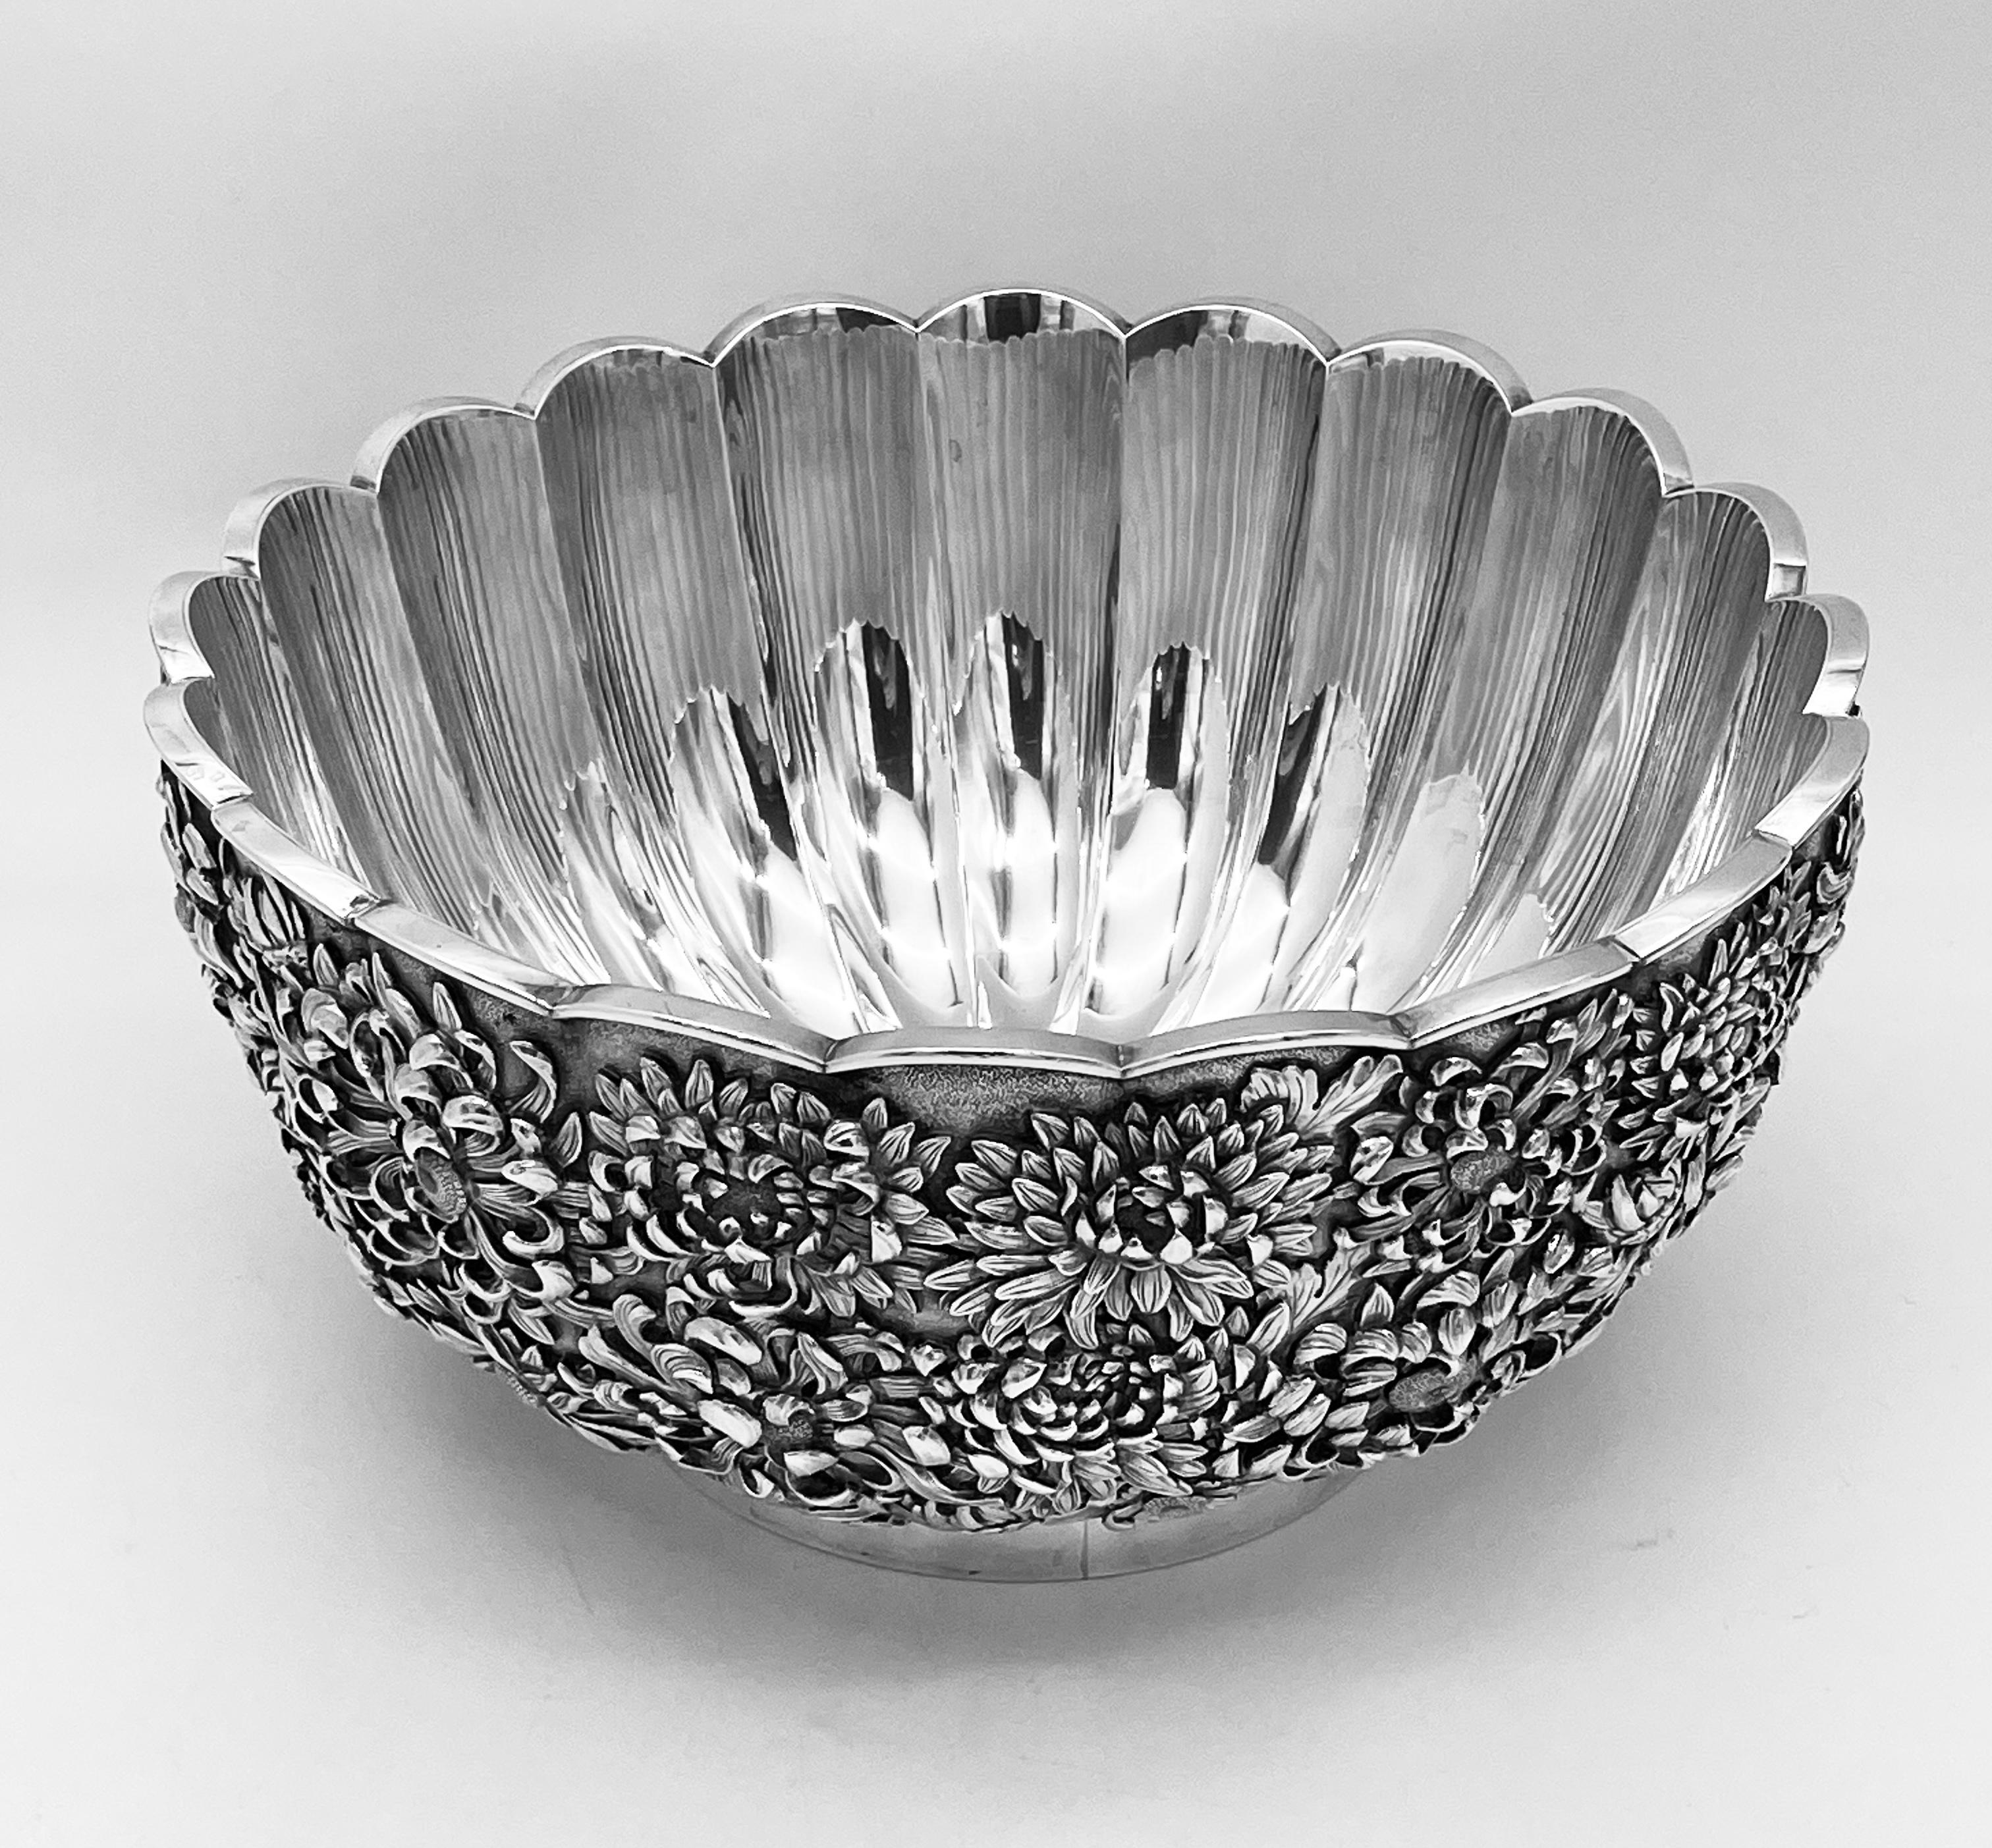 A large, fine late 19th or early 20th century Japanese Silver Bowl, with the mark of Yoshikatsu of Yokohama.

The bowl from the Meiji period, is of hemispherical form with scalloped rim upon a plain round foot. The exterior is profusely embossed